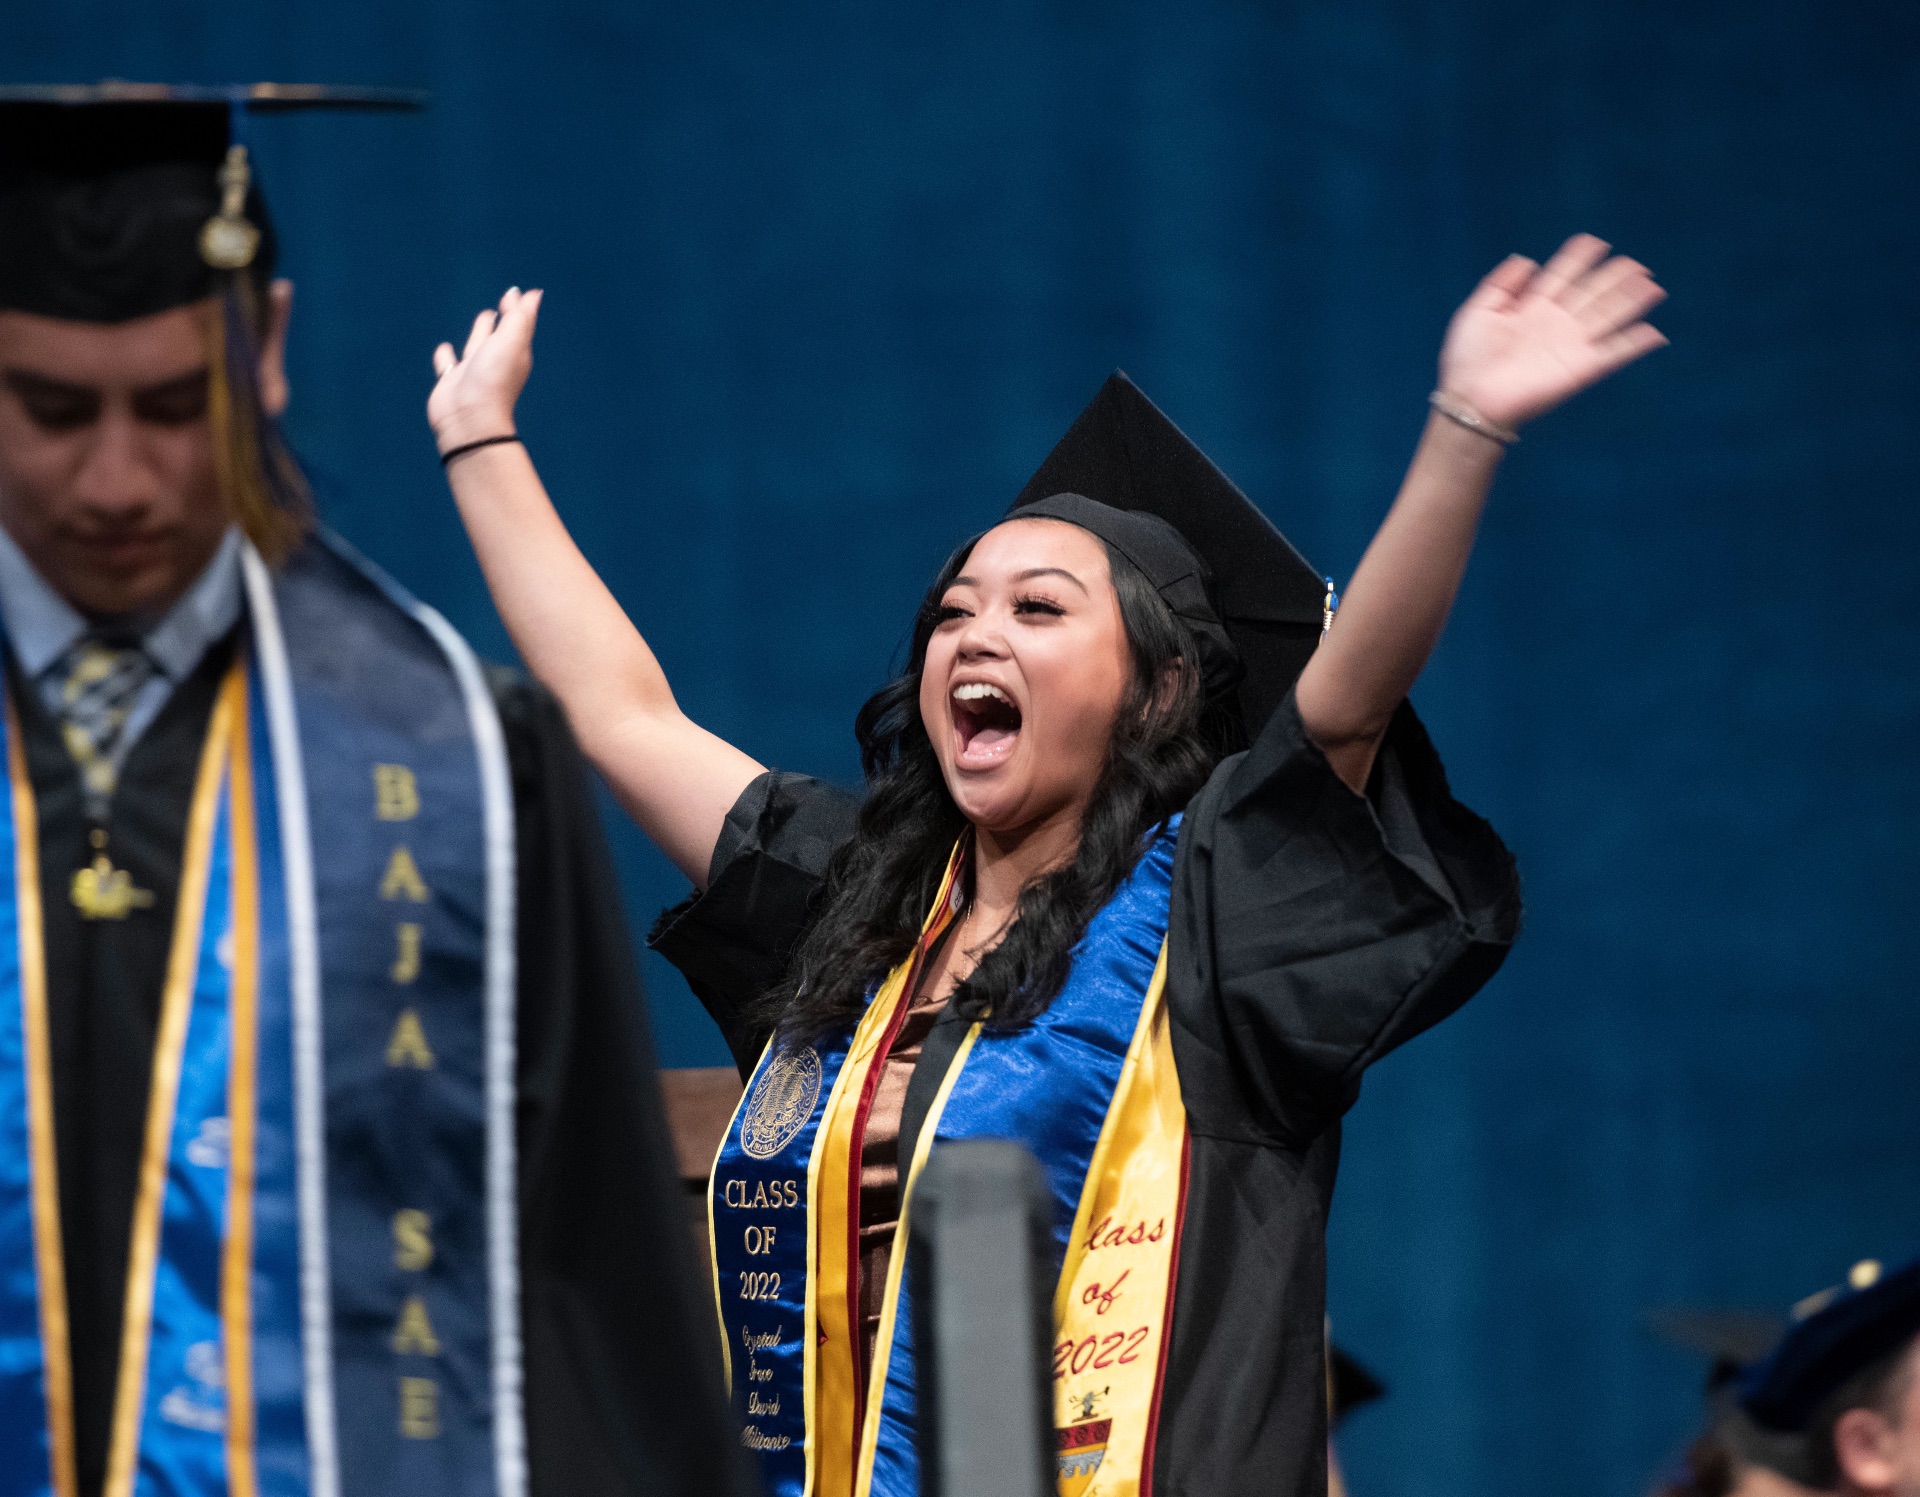 Commencement: a recent graduate with her hands raised in celebration